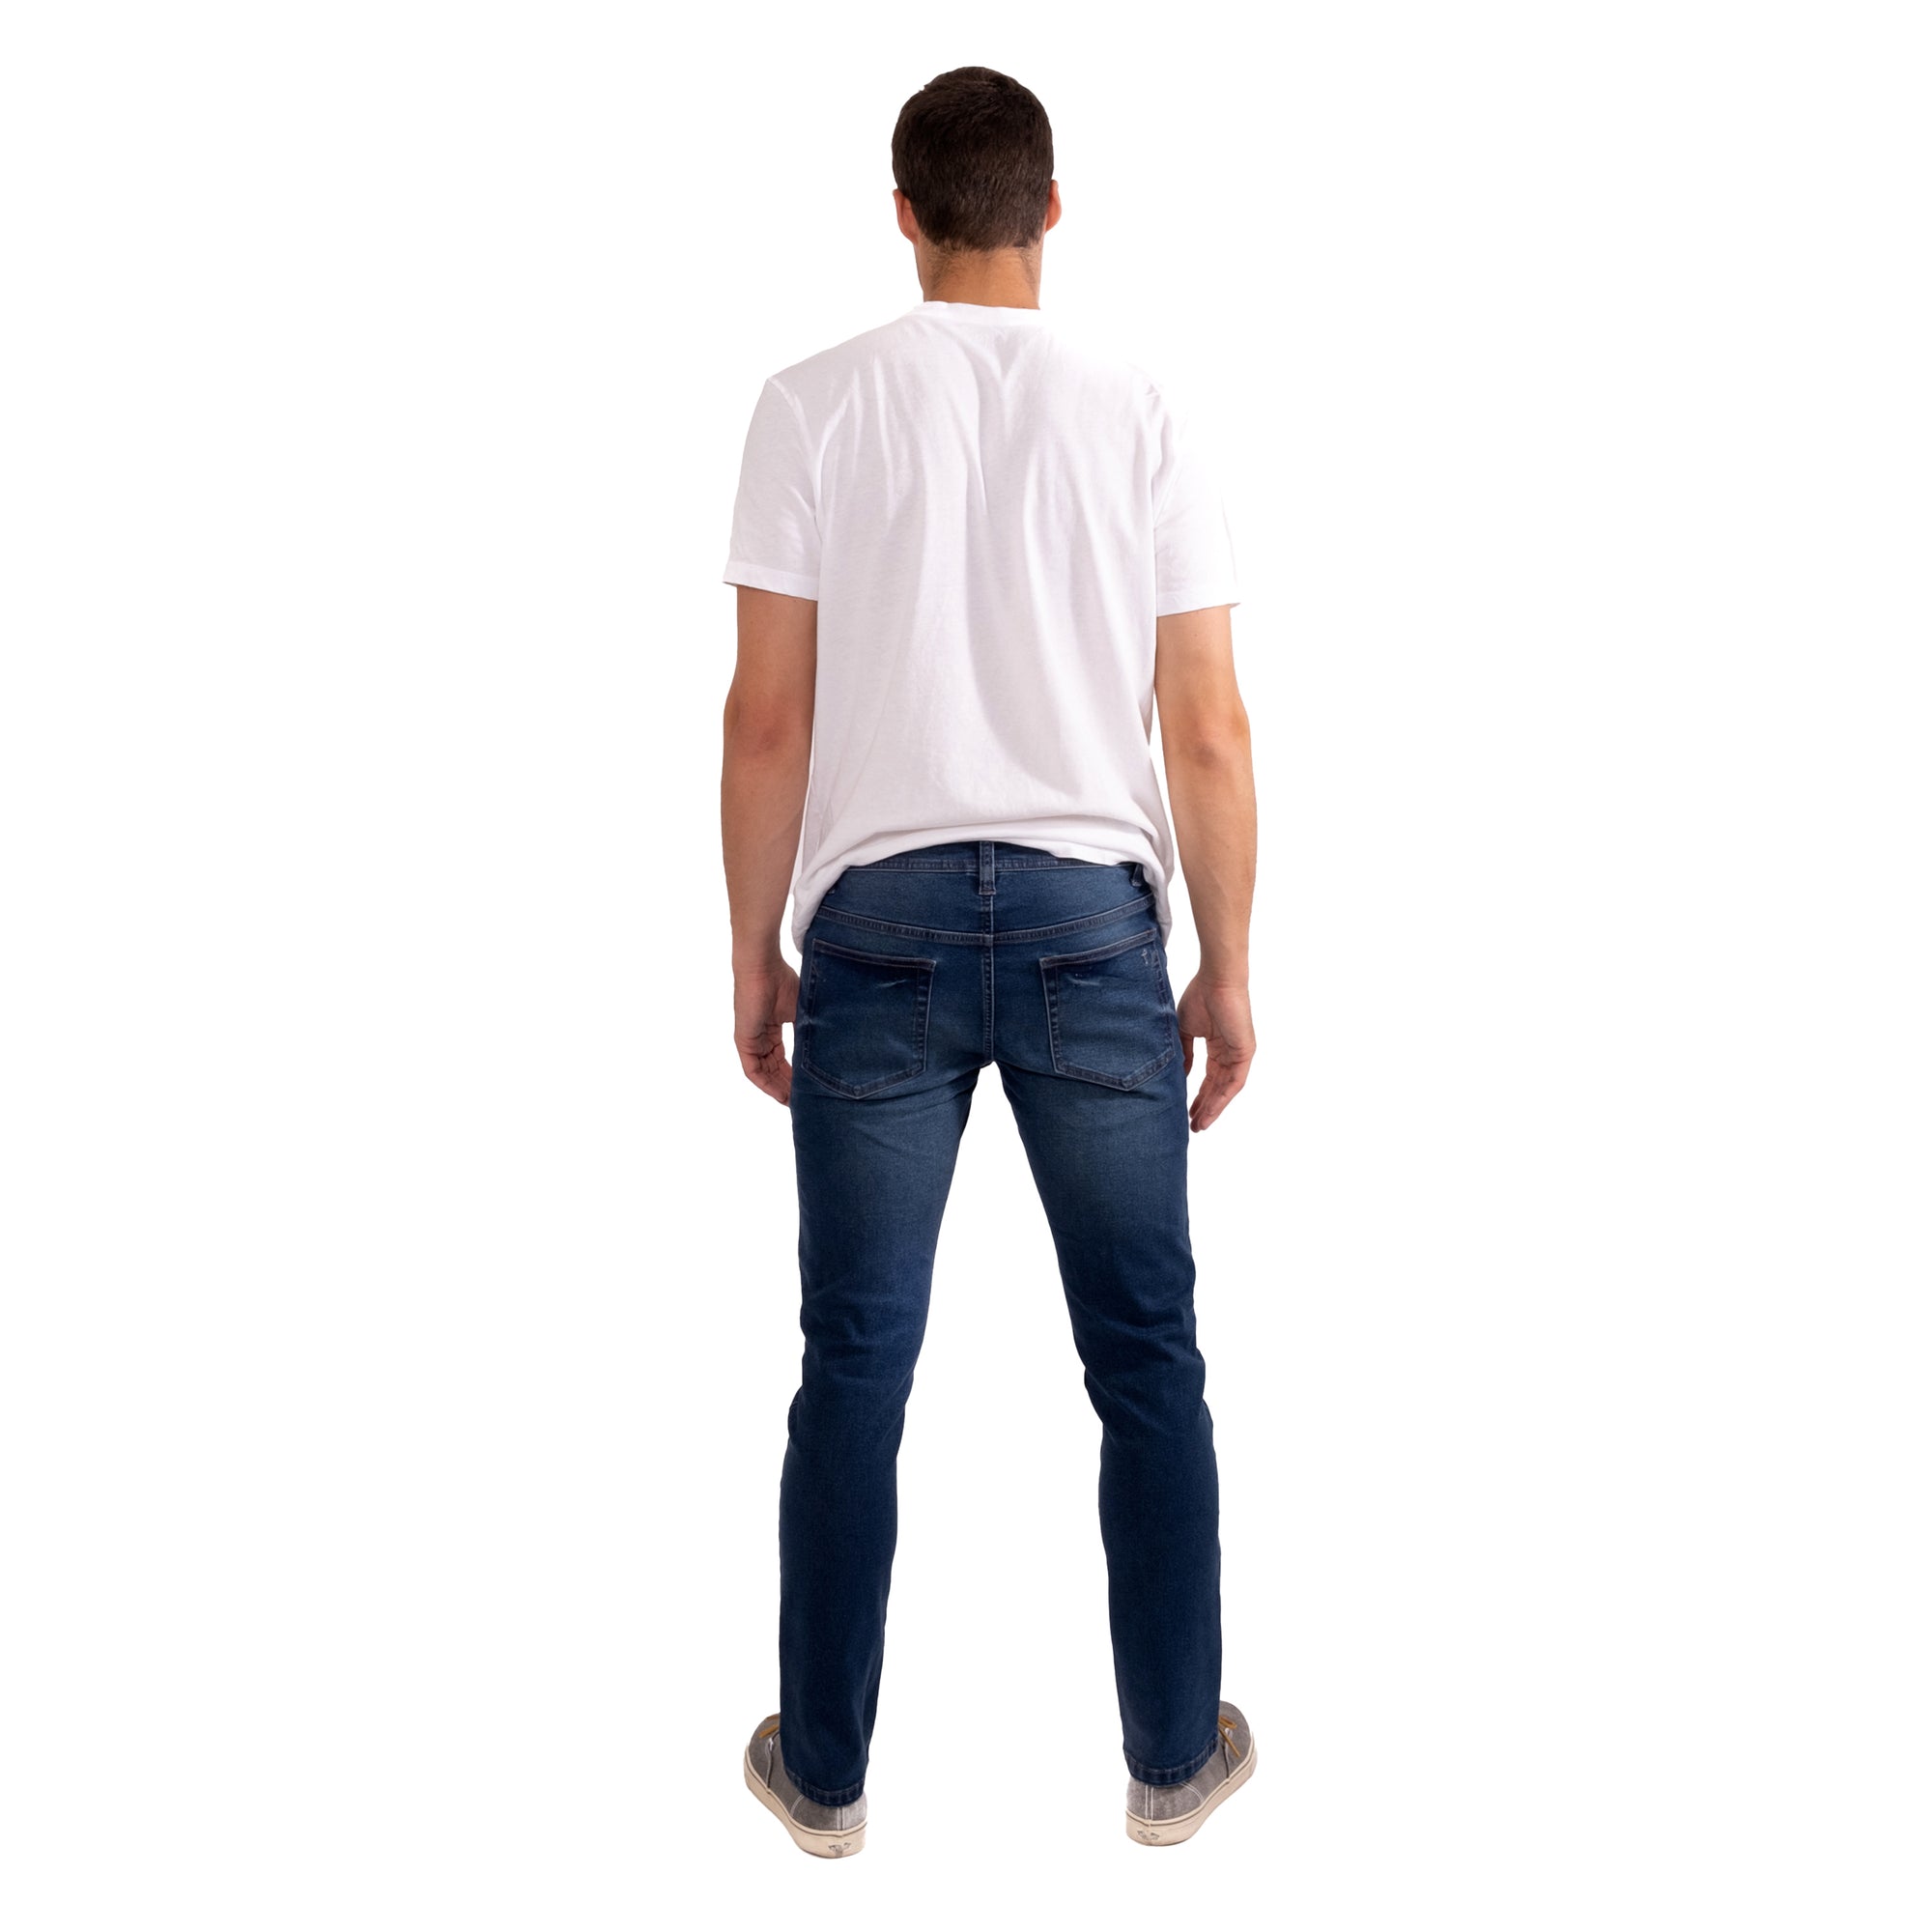 The Perfect Jean  Unbelievably Comfortable Stretch Denim by TPJ